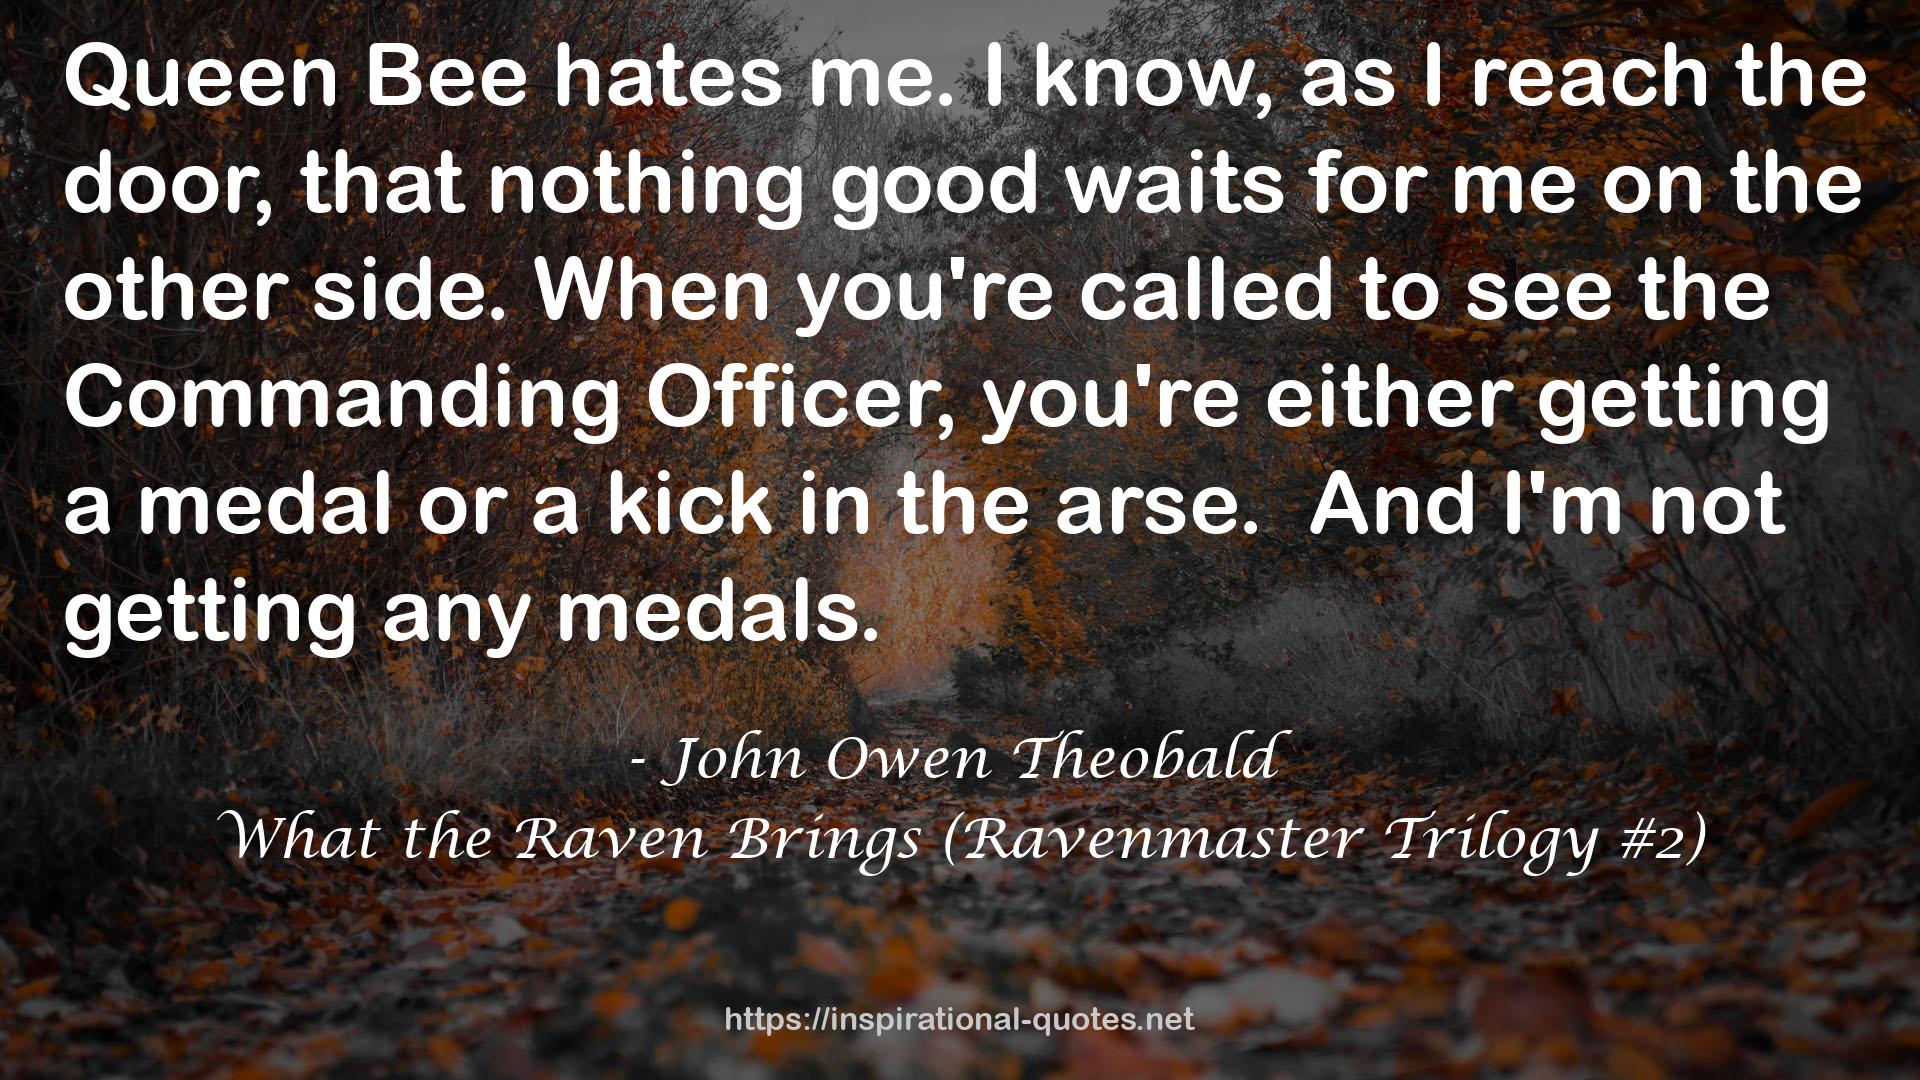 What the Raven Brings (Ravenmaster Trilogy #2) QUOTES